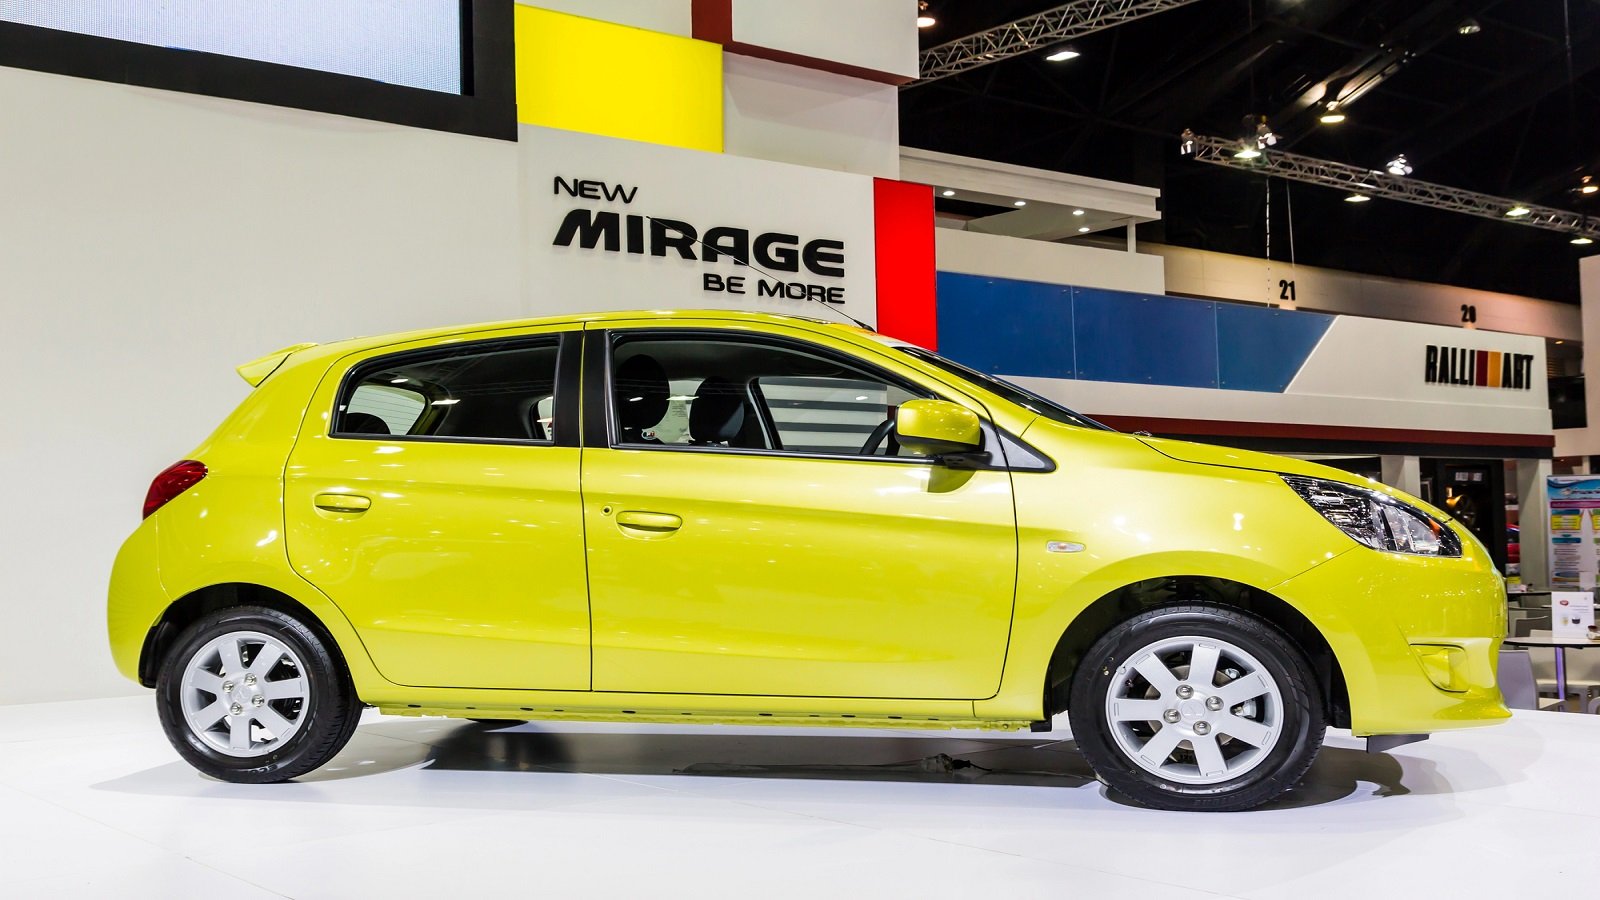 <p>Here are three unique features that make it an ideal option for you:</p><ul> <li><strong>Fuel Efficiency:</strong> The Mirage boasts an impressive fuel economy, making it one of the most fuel-efficient vehicles in its class and helping you save money on gas.</li> <li><strong>Compact Design:</strong> Its small size makes parking and maneuvering through tight spaces a breeze, ensuring your daily commutes are hassle-free.</li> <li><strong>Affordability:</strong> Offering a lower starting price than most competitors, the Mirage is extremely budget-friendly, allowing you to own a brand-new car without breaking the bank.</li> </ul><p>With proper maintenance, this economical car is known for its longevity, and owners can expect it to last an average <strong>lifespan of around 165,000 miles</strong> or more.</p>